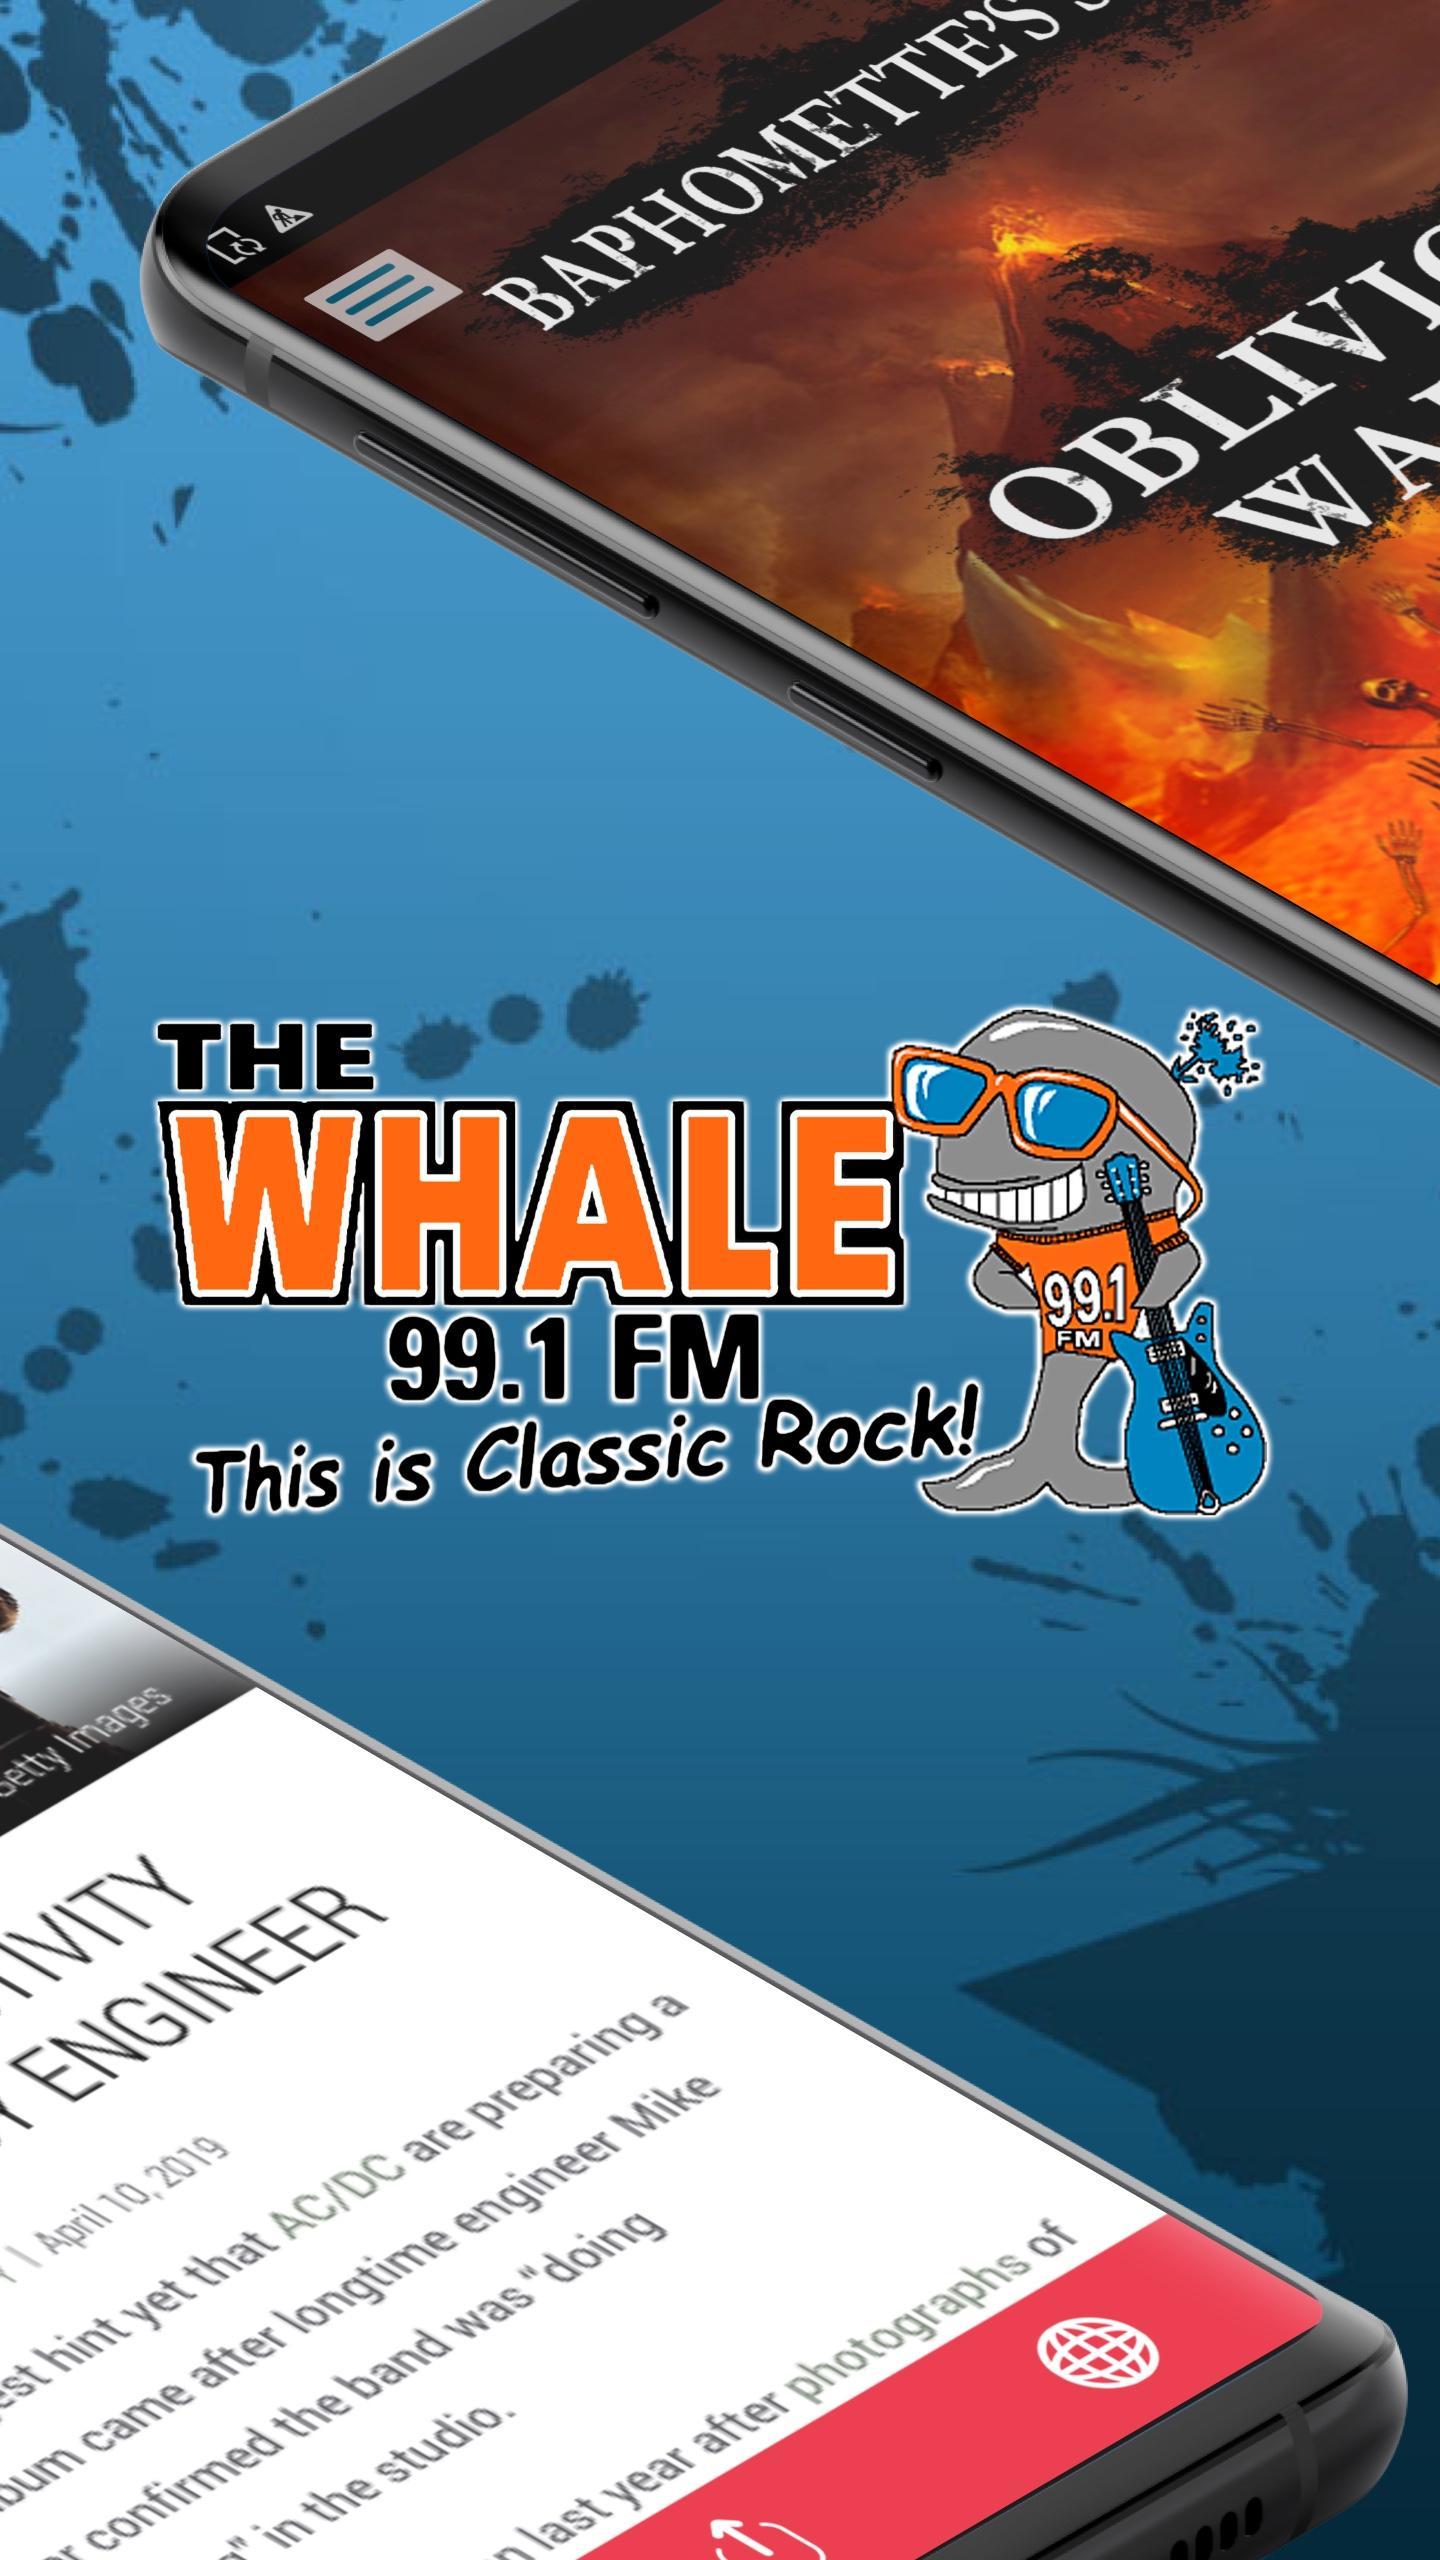 The Whale 99.1 FM - This Is Classic Rock (WAAL)